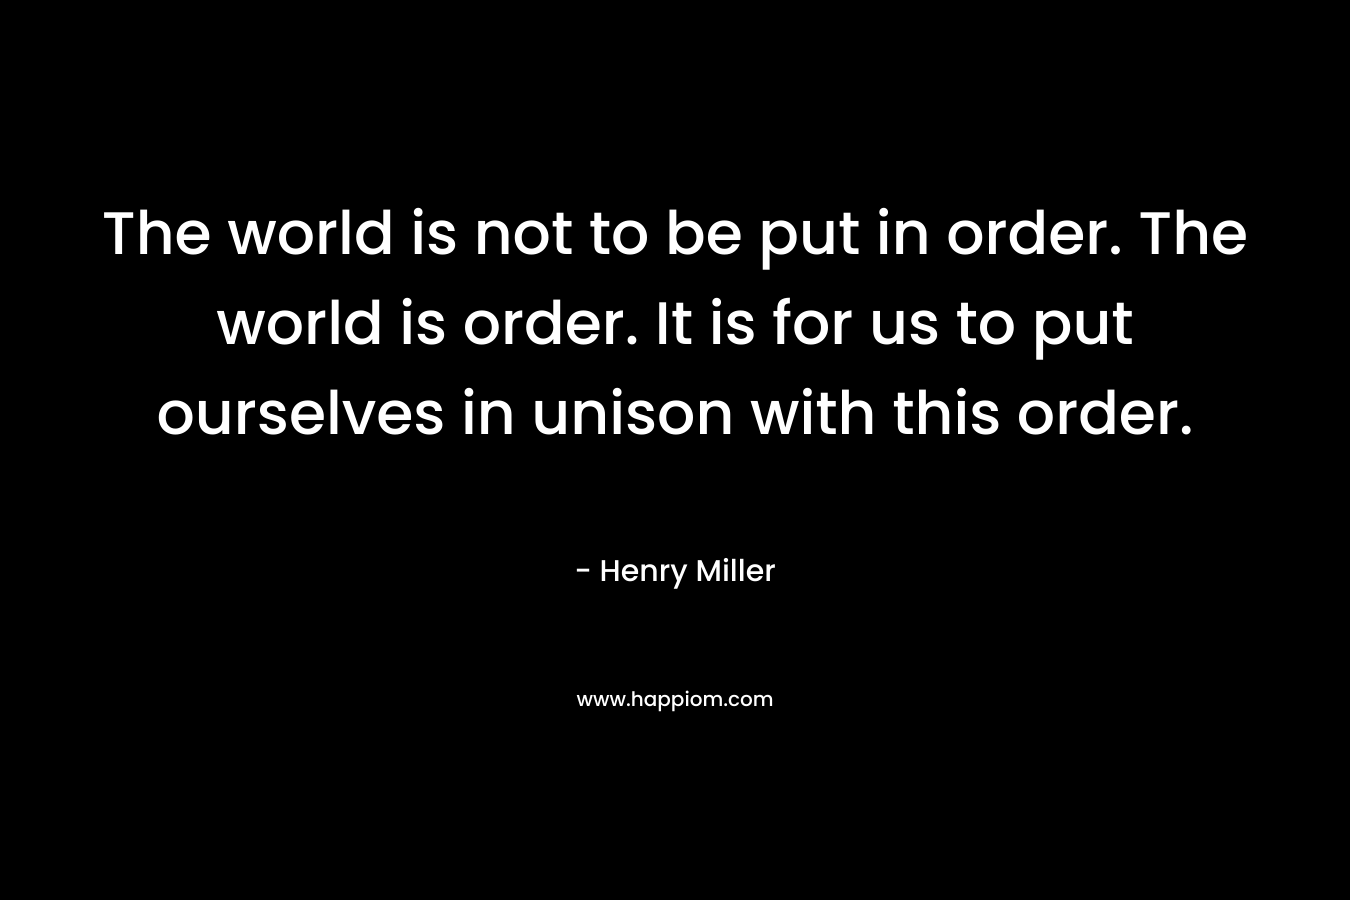 The world is not to be put in order. The world is order. It is for us to put ourselves in unison with this order.